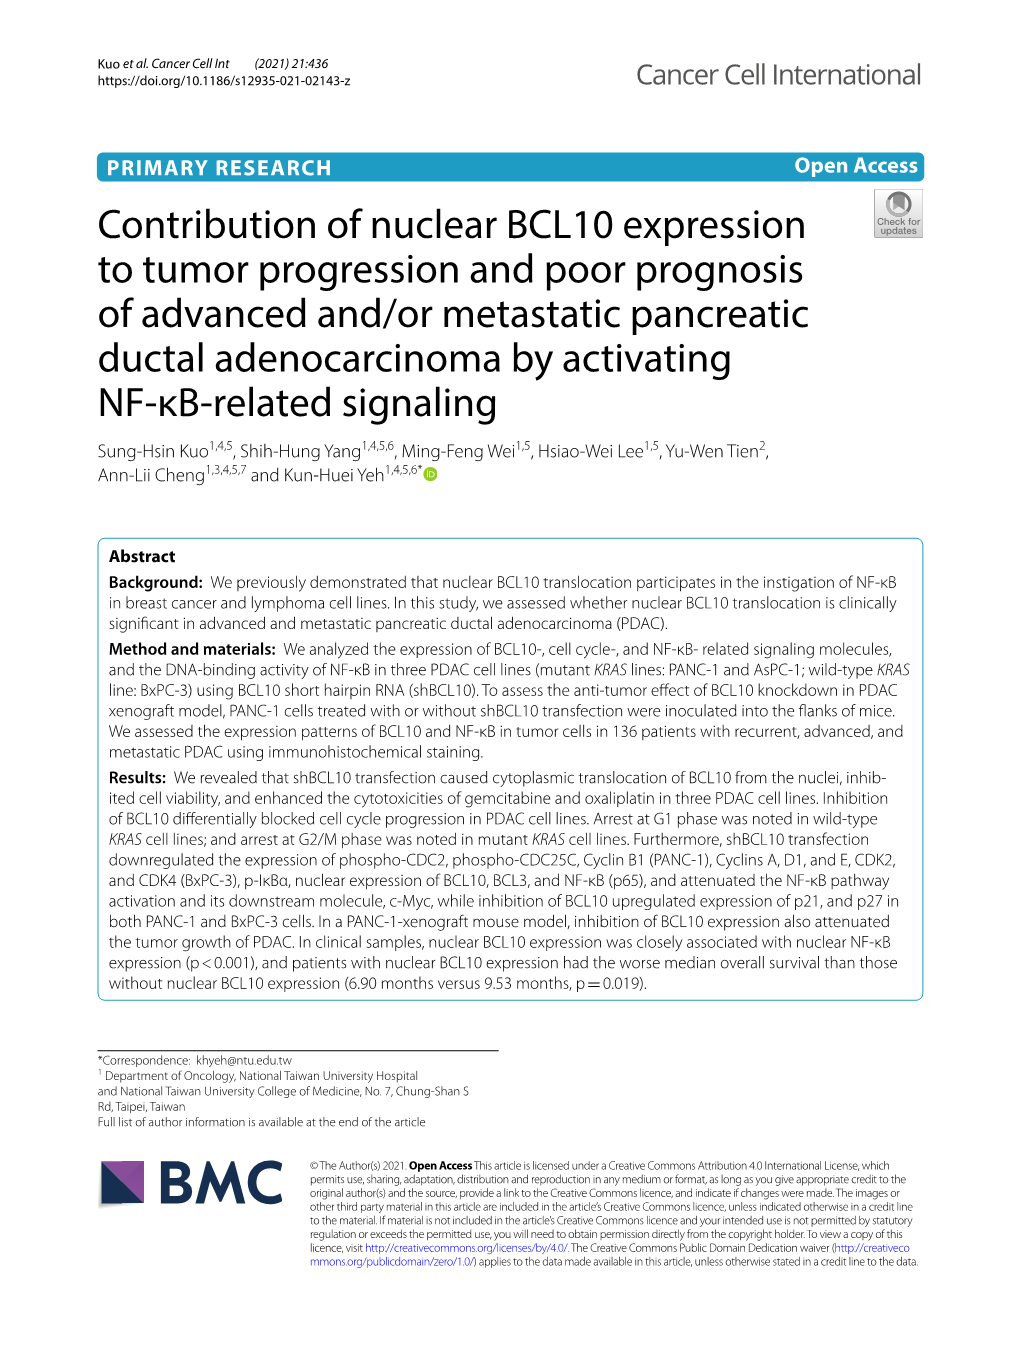 Contribution of Nuclear BCL10 Expression to Tumor Progression